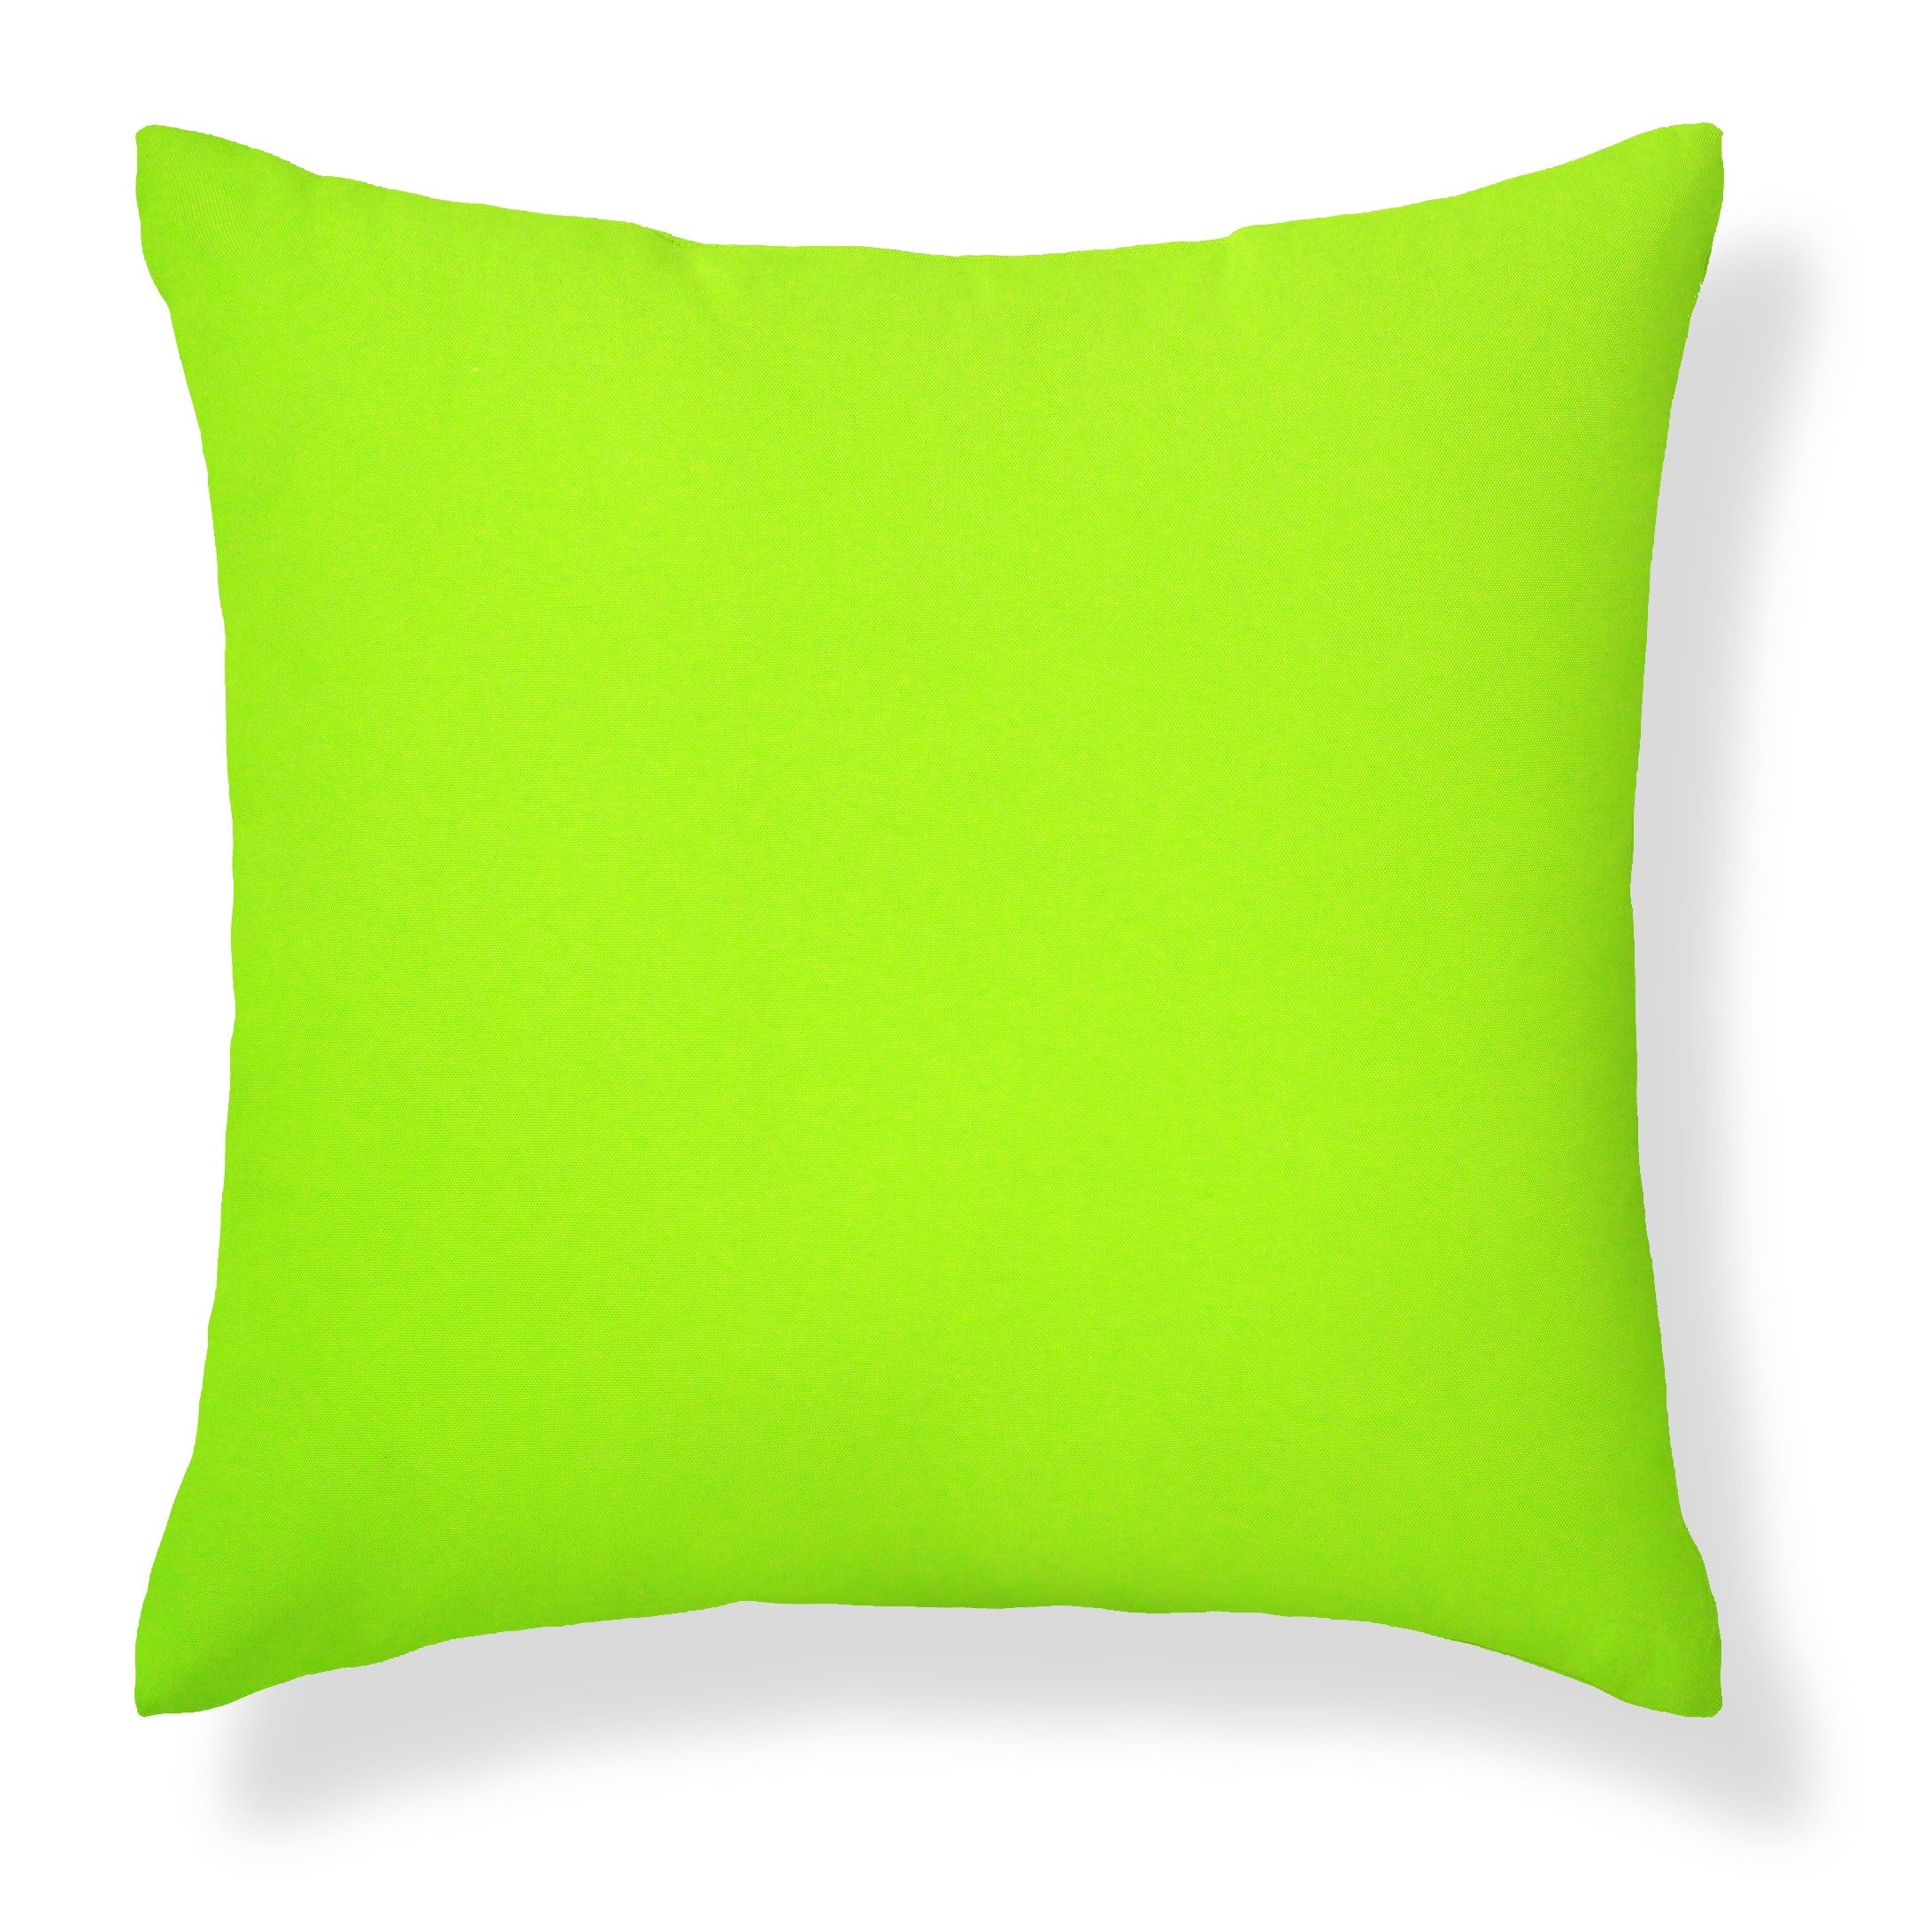 Set of 2 Premium Lime Garden Square Water Resistant Cushions